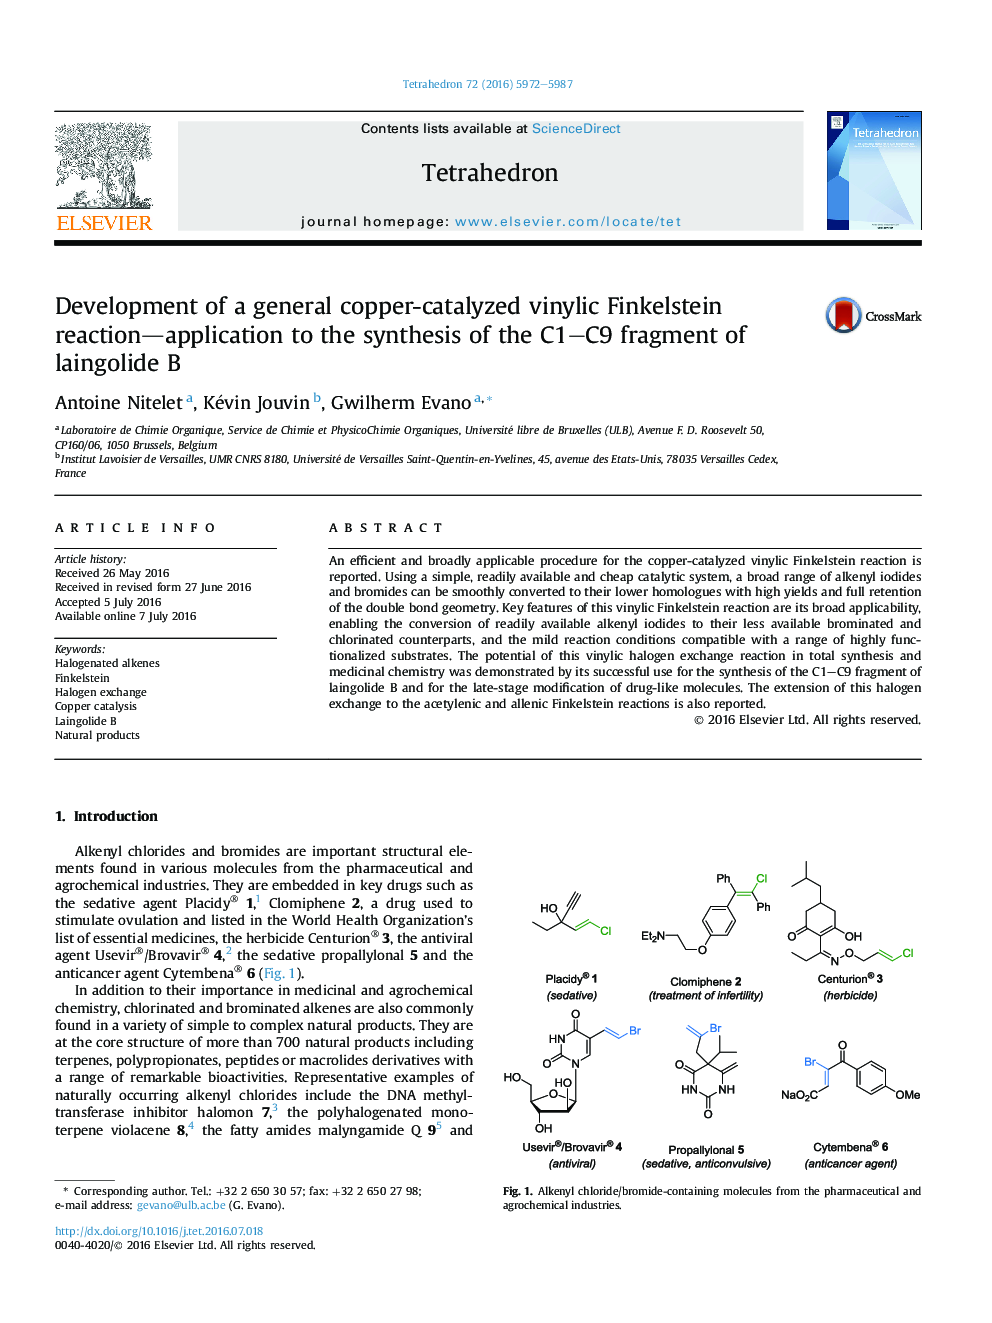 Development of a general copper-catalyzed vinylic Finkelstein reaction-application to the synthesis of the C1-C9 fragment of laingolide B